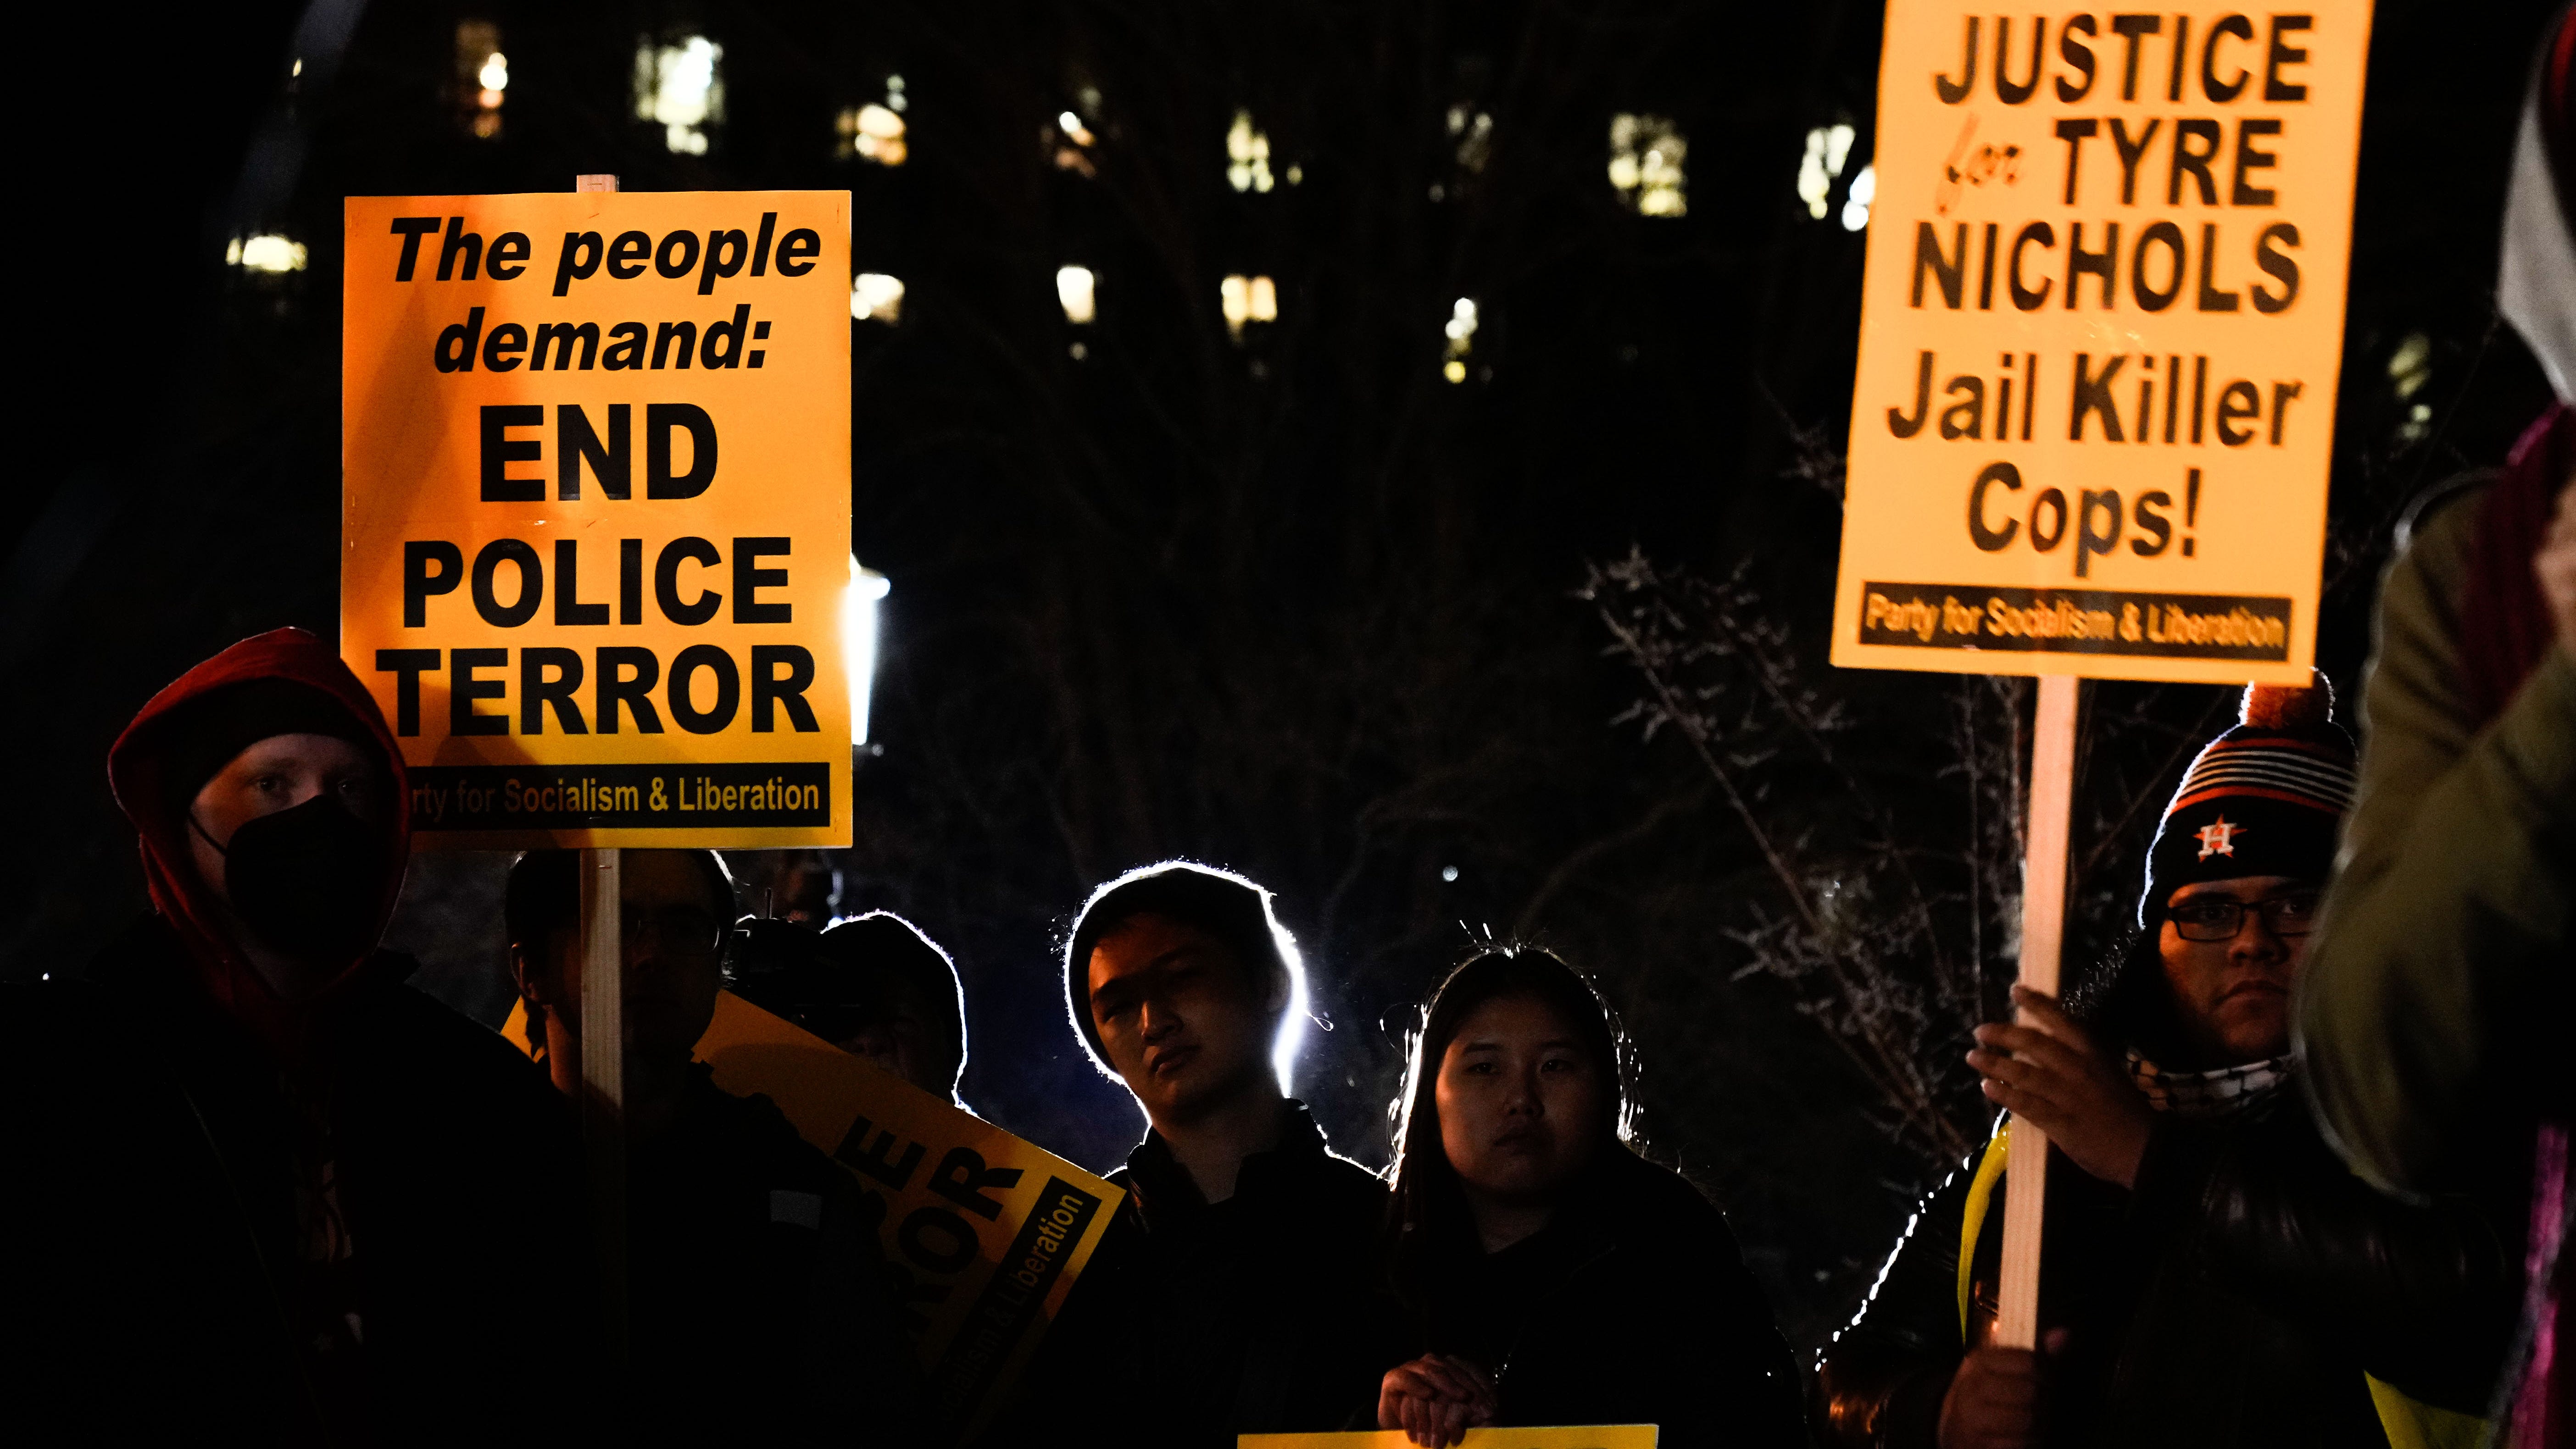 Protestors rally in Lafayette Square after Memphis officials released police body camera footage of the arrest of Tyre Nichols. Nichols was pulled over by police on January 7 in Memphis. The encounter left Nichols hospitalized in critical condition after what police initially described as "confrontations" with officers. Nichols died three days later. Five former officers, who were fired last week, were charged Thursday with second-degree murder and other crimes in connection to Nichols' death.